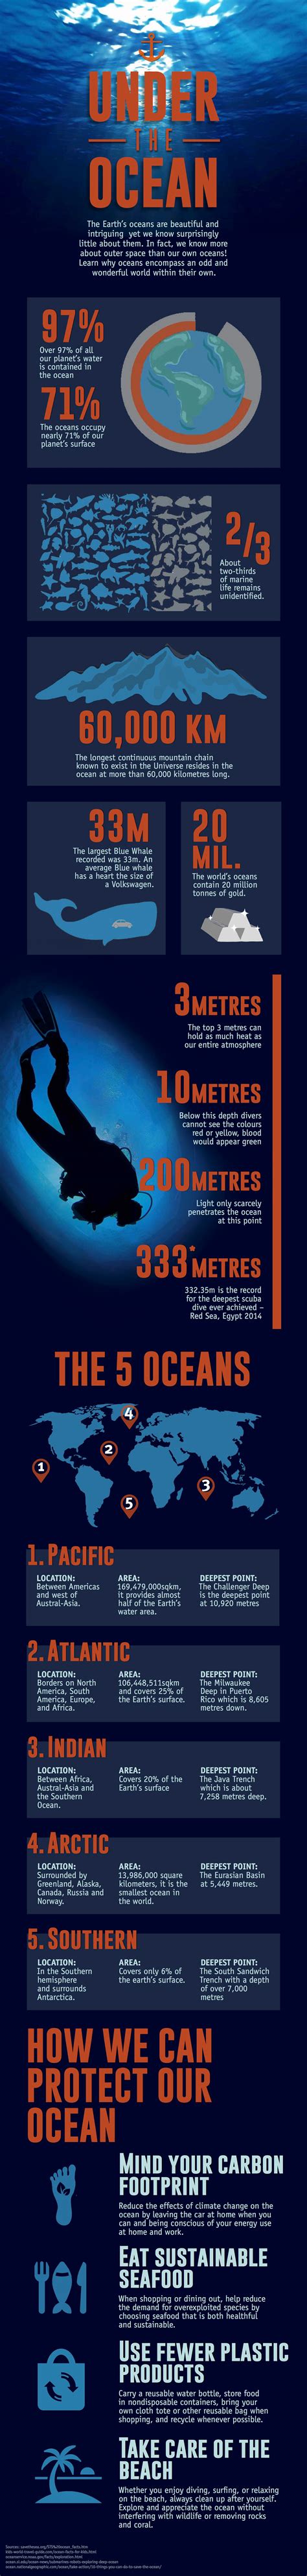 “ocean Facts Infographic” Gallery51584683